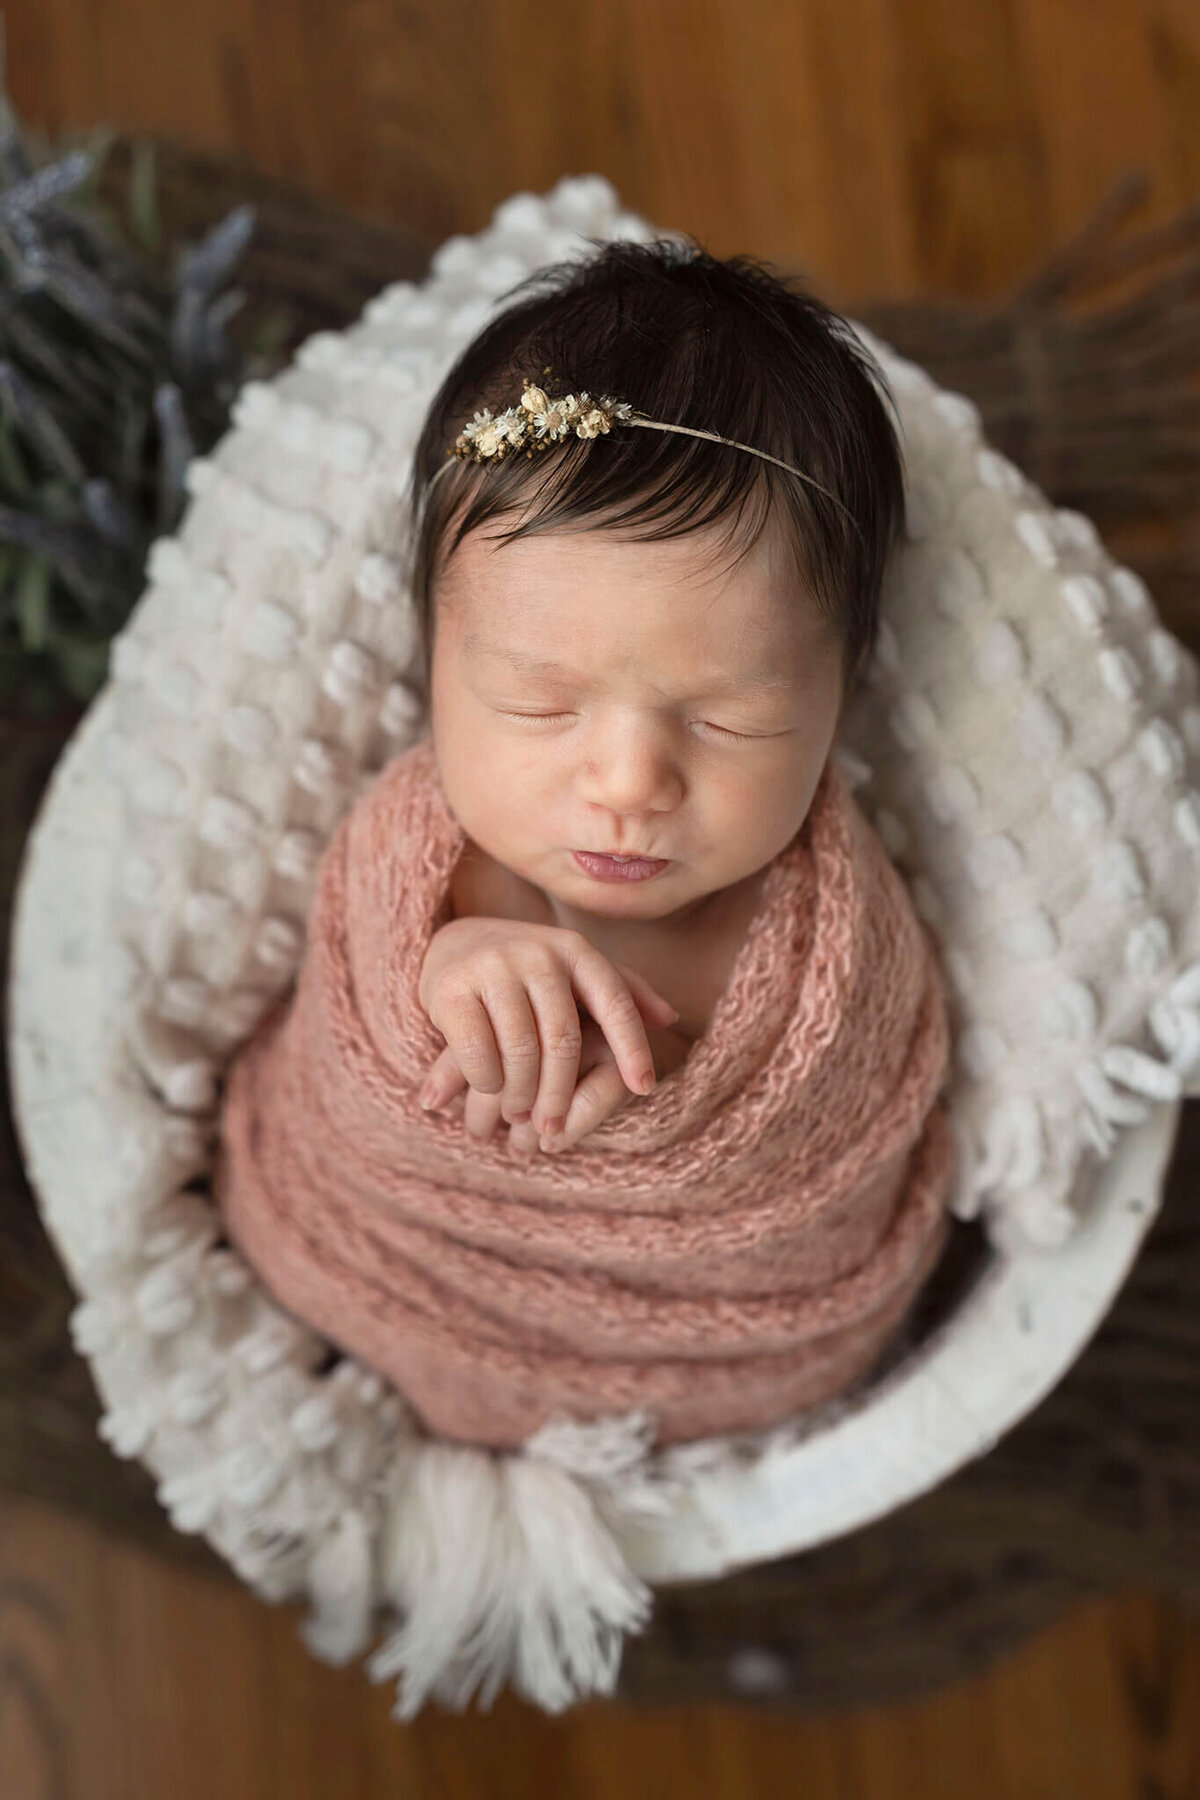 NJ Newborn photography session with baby girl in bucket